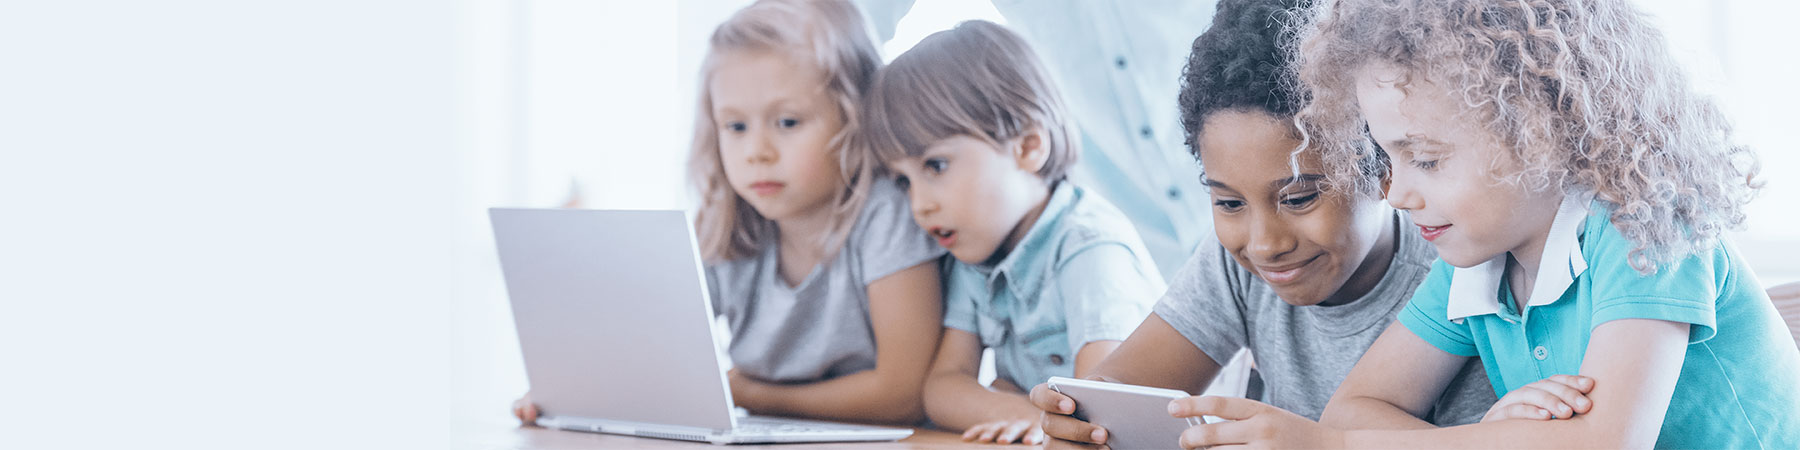 Children using laptop and smartphone